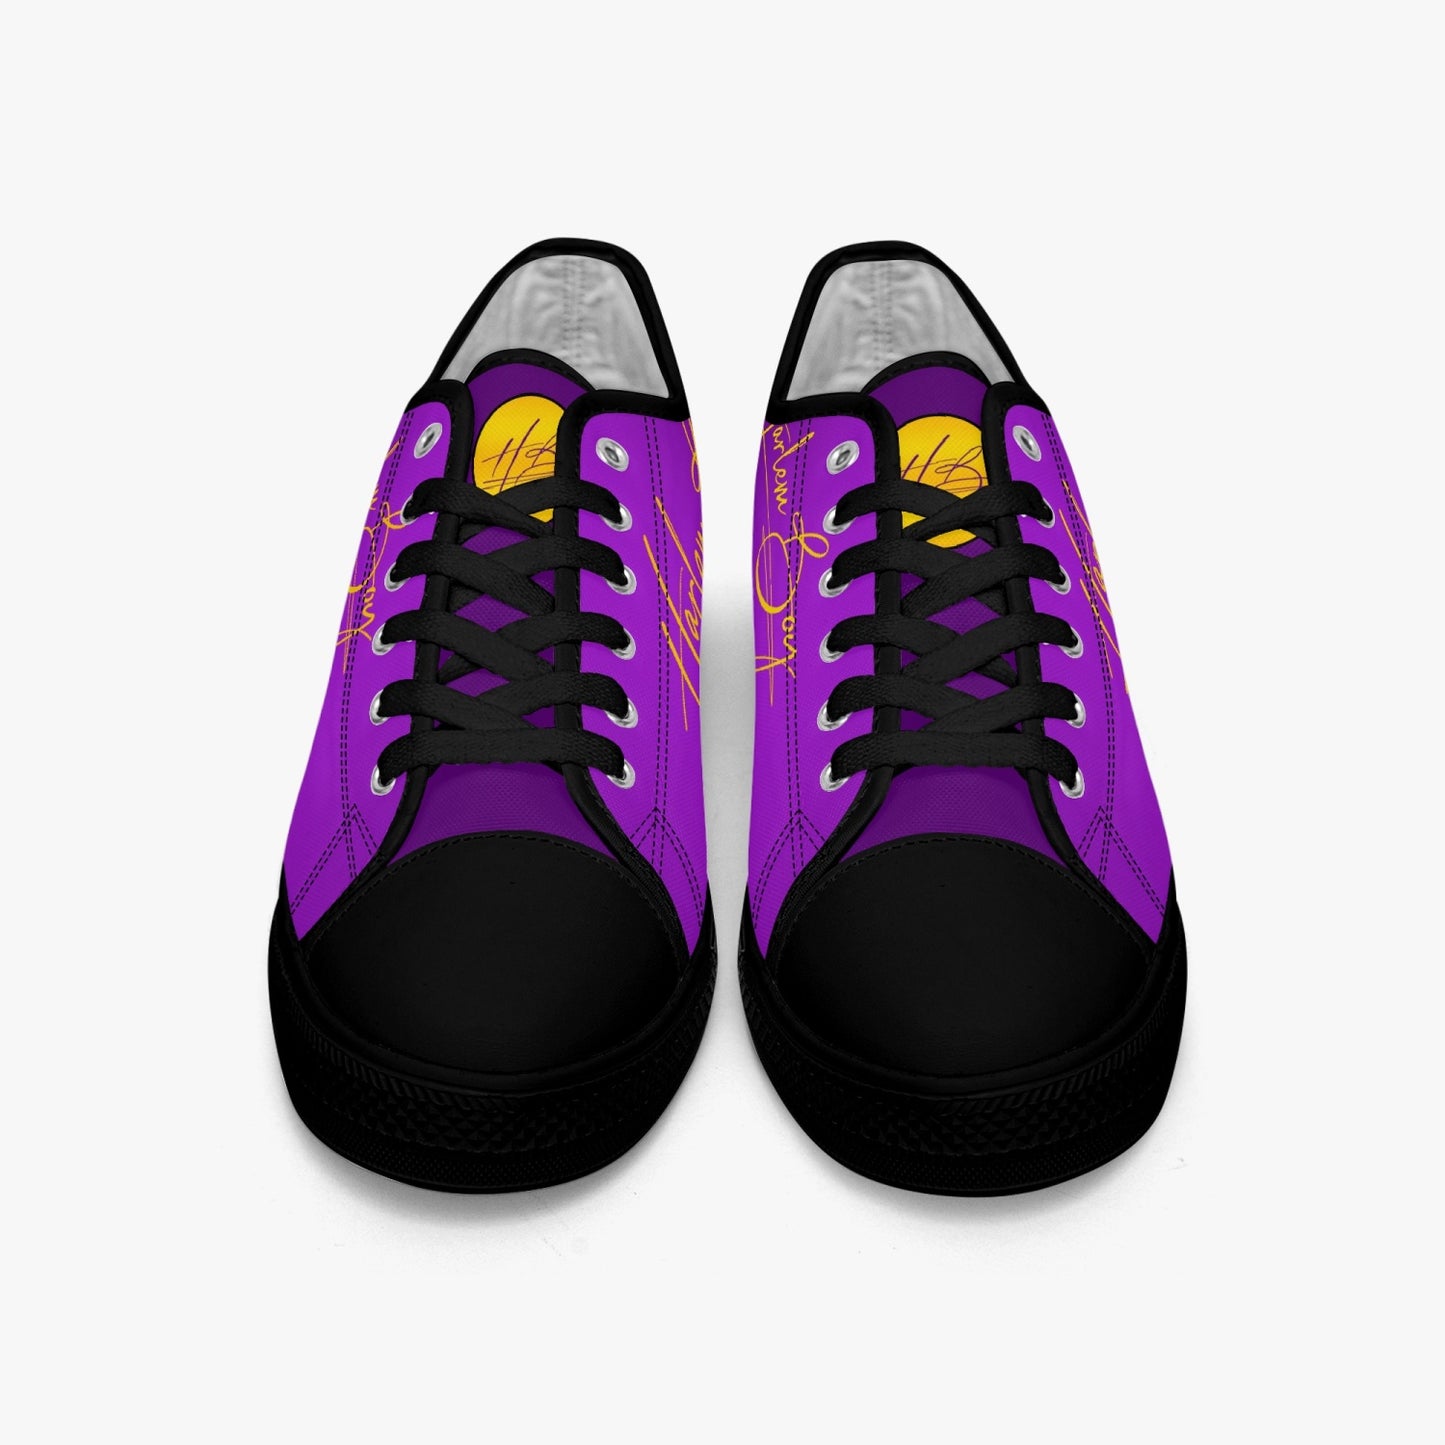 HB Harlem Boy "Lenox Ave" Classic Low Tops - Purple and Gold - Men (Black or White Sole)